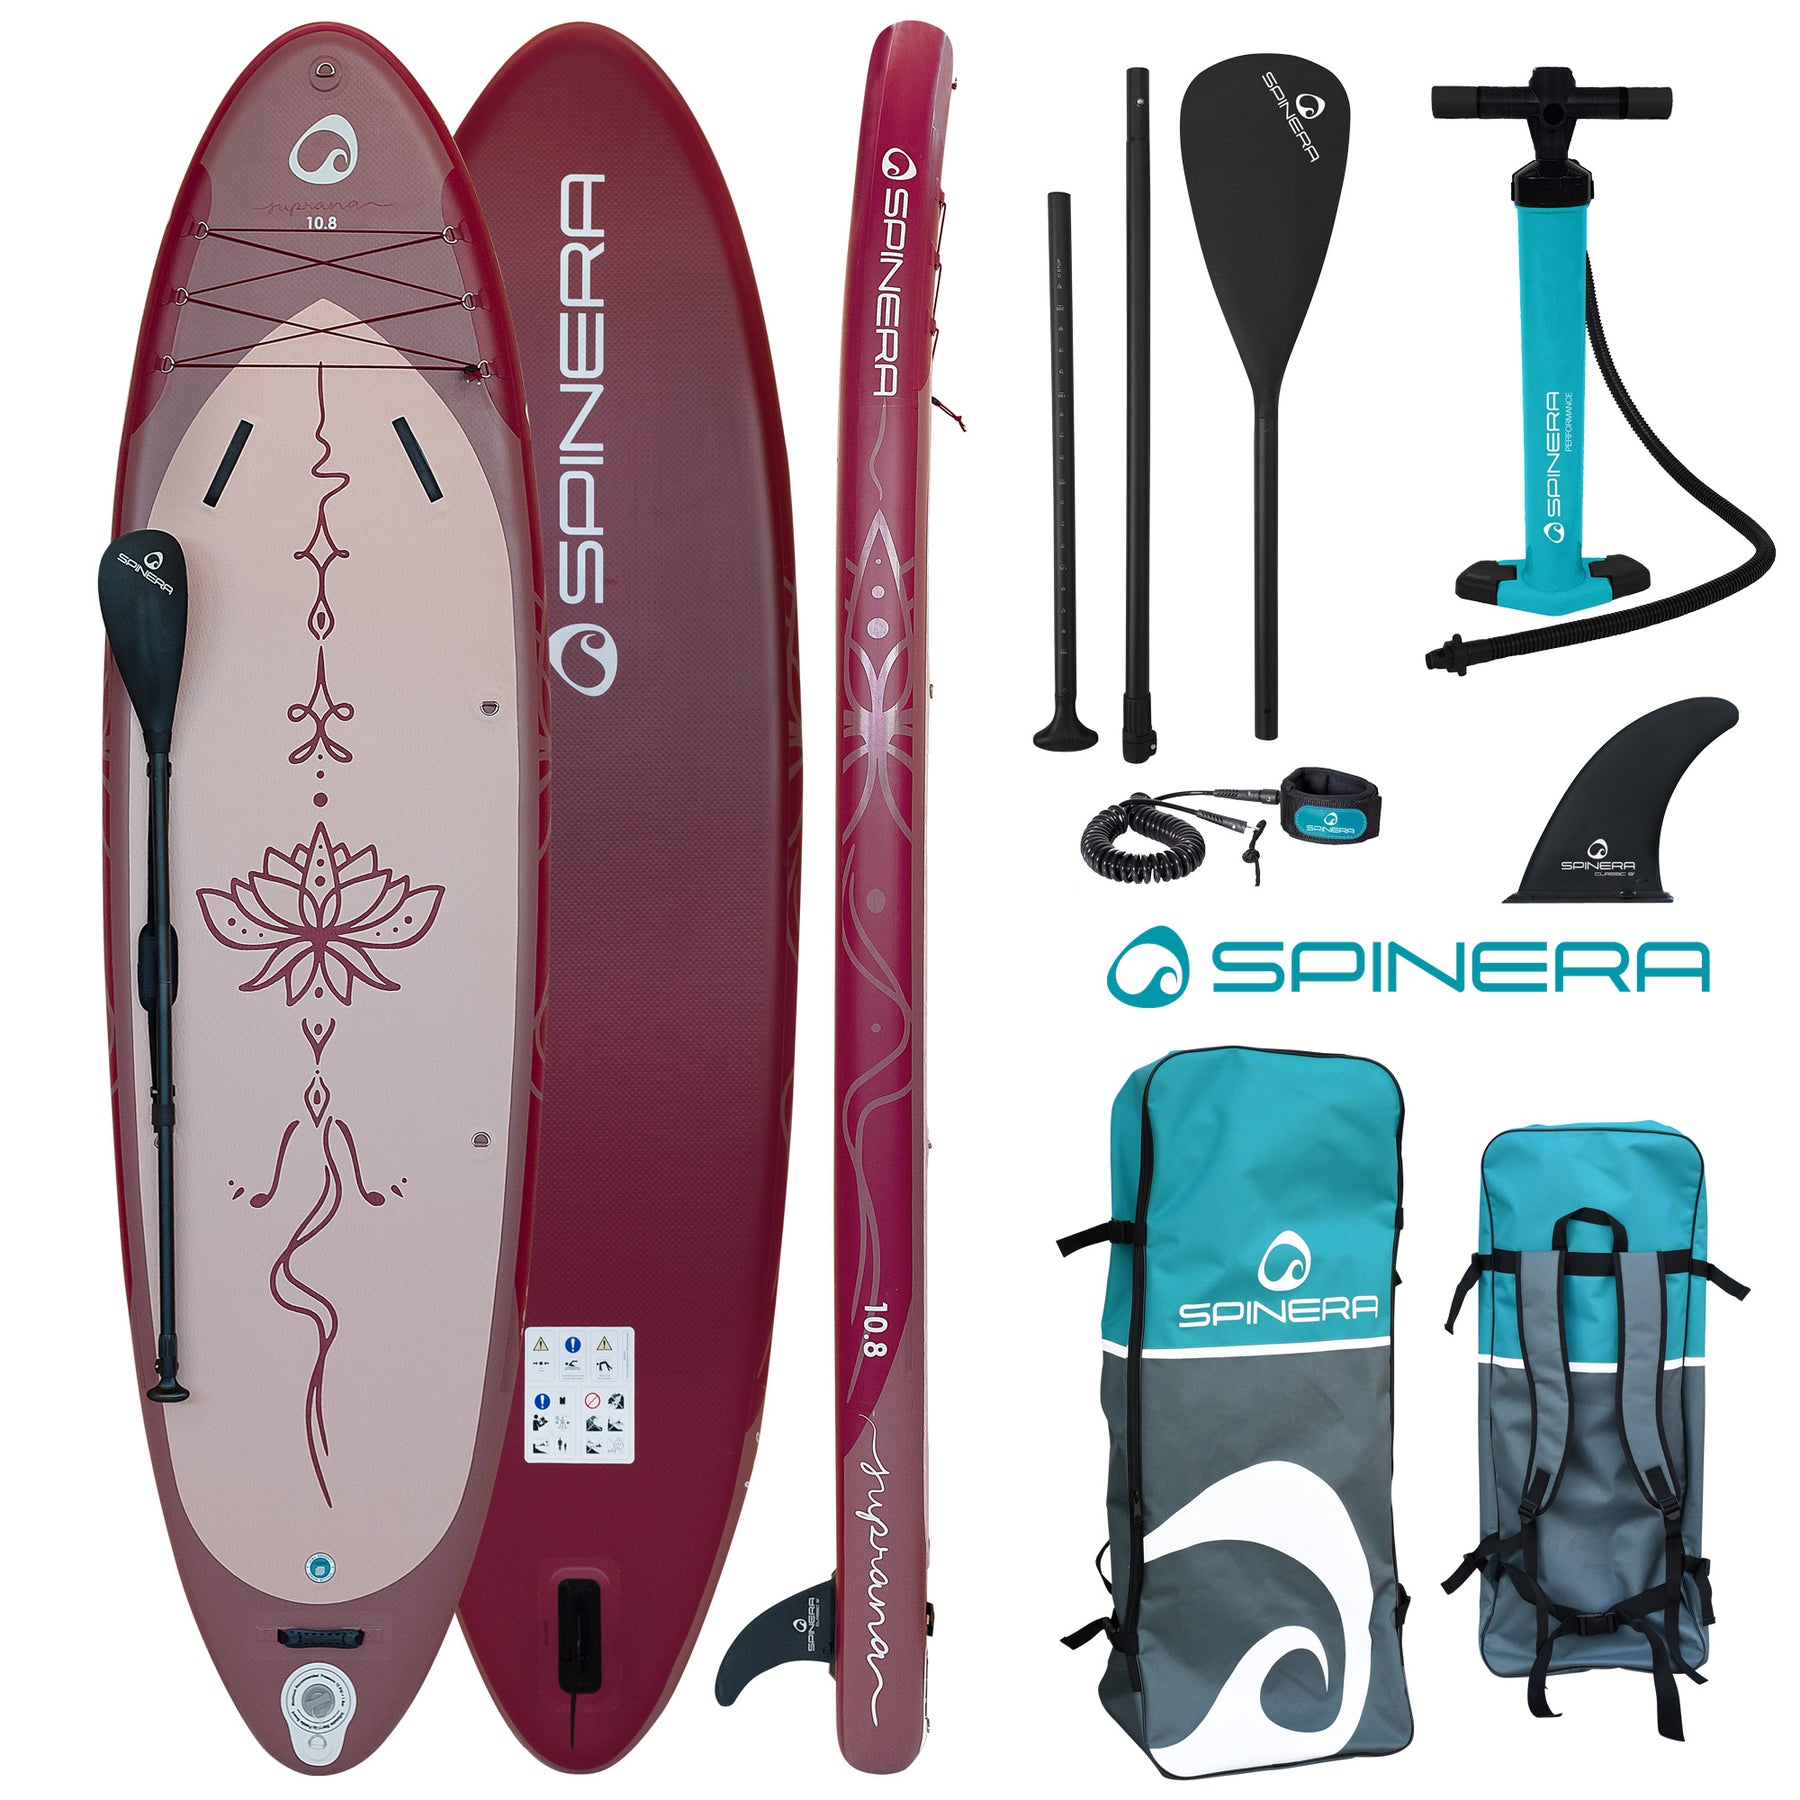 Spinera 10 Ft Inflatable Yoga Paddle Board - The Suprana Yoga SUP wi –